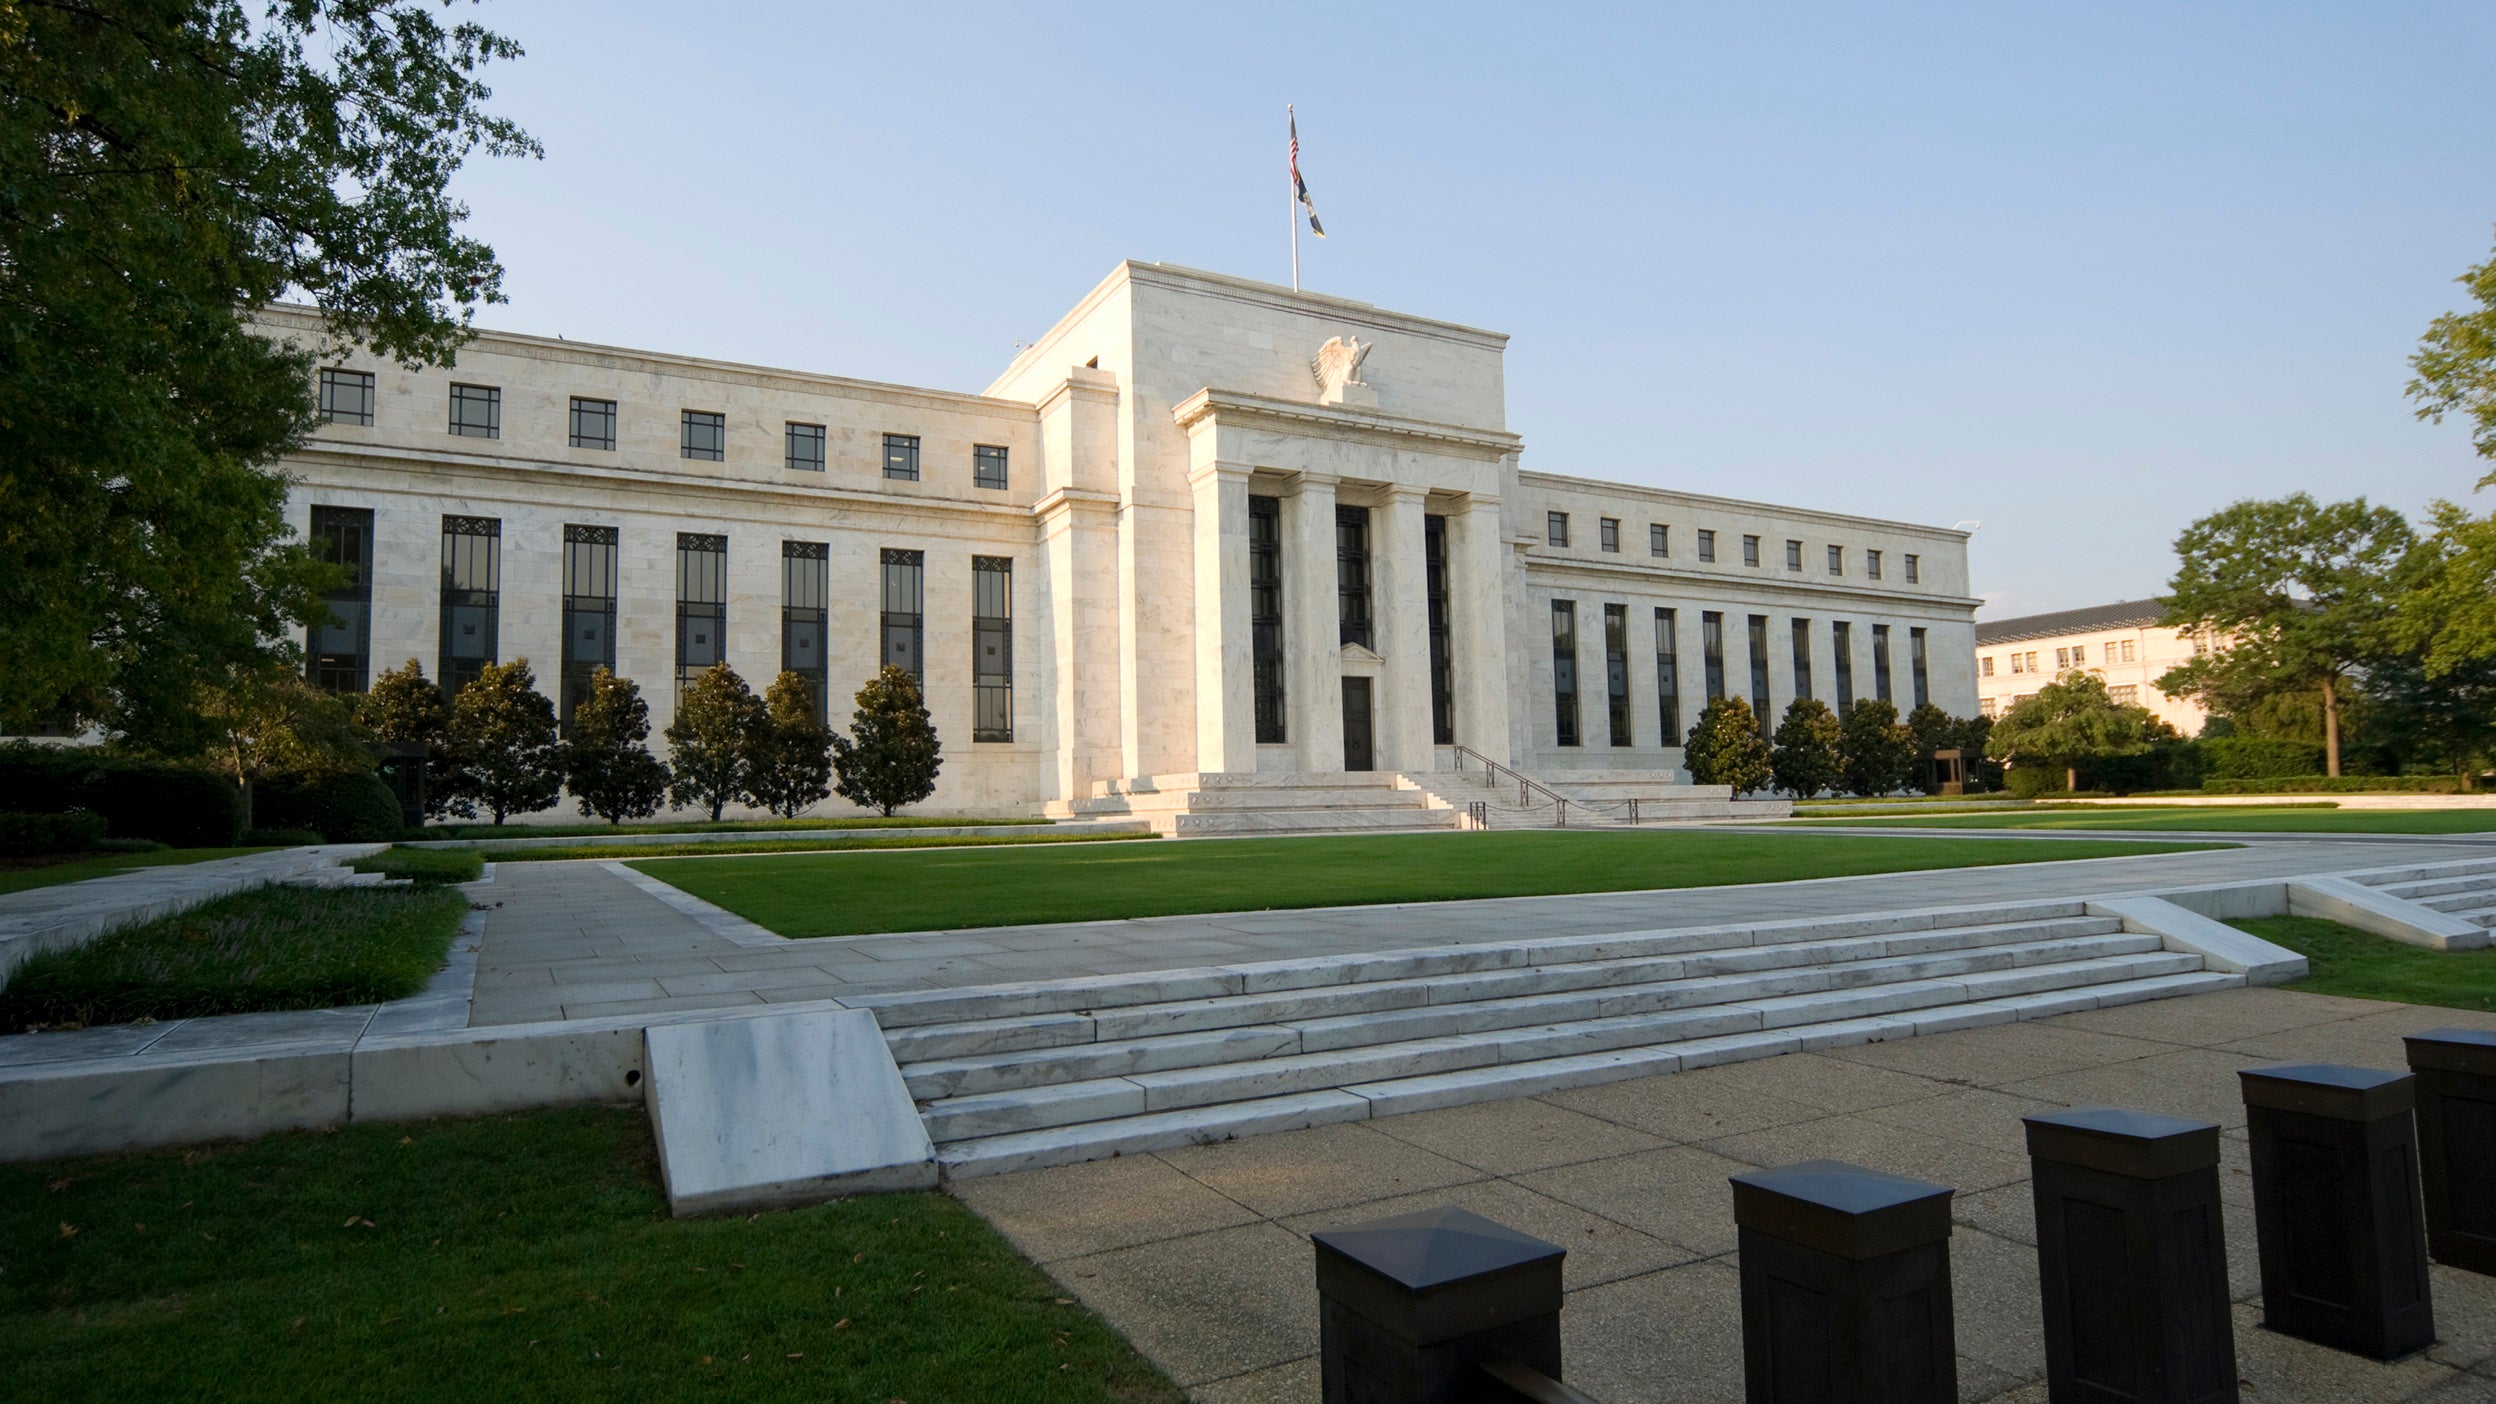 Will the Fed hike rates after last week’s banking turmoil?